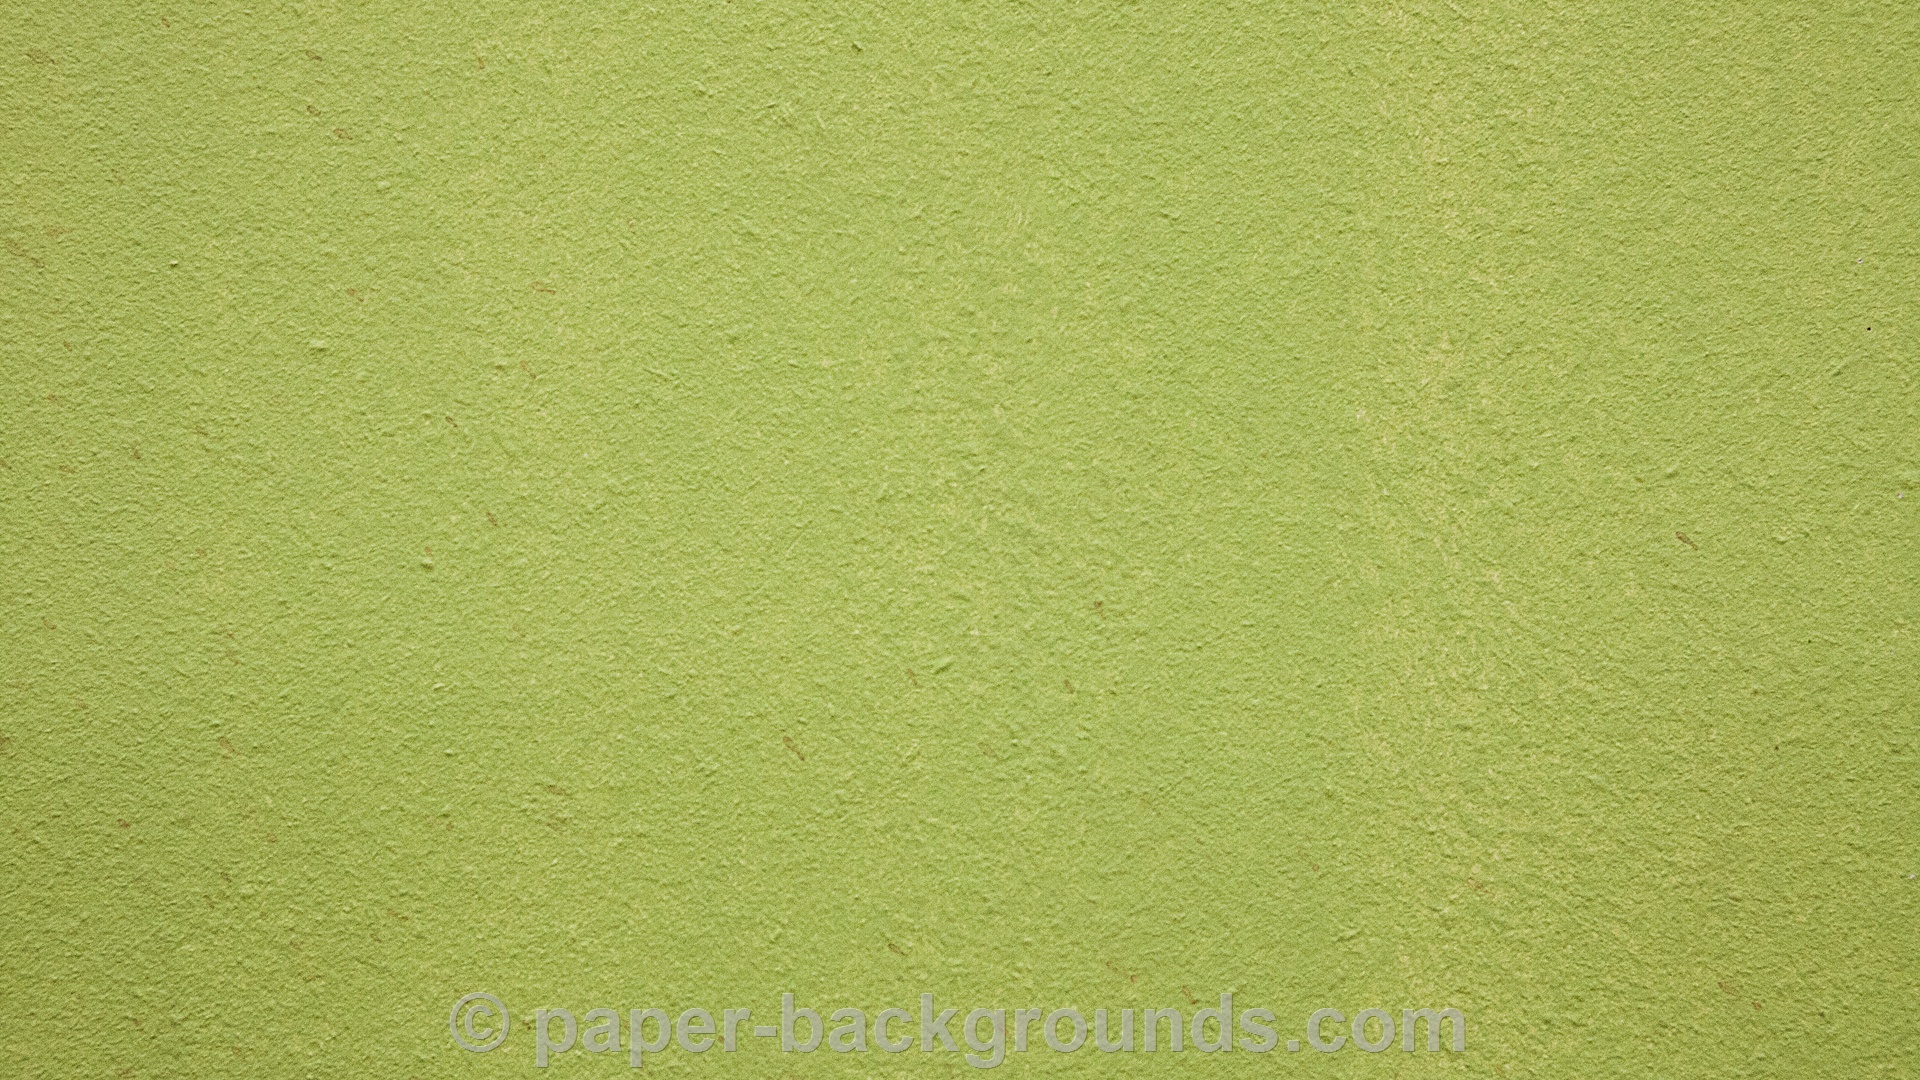 Paper Backgrounds | Green Painted Wall Texture Background HD